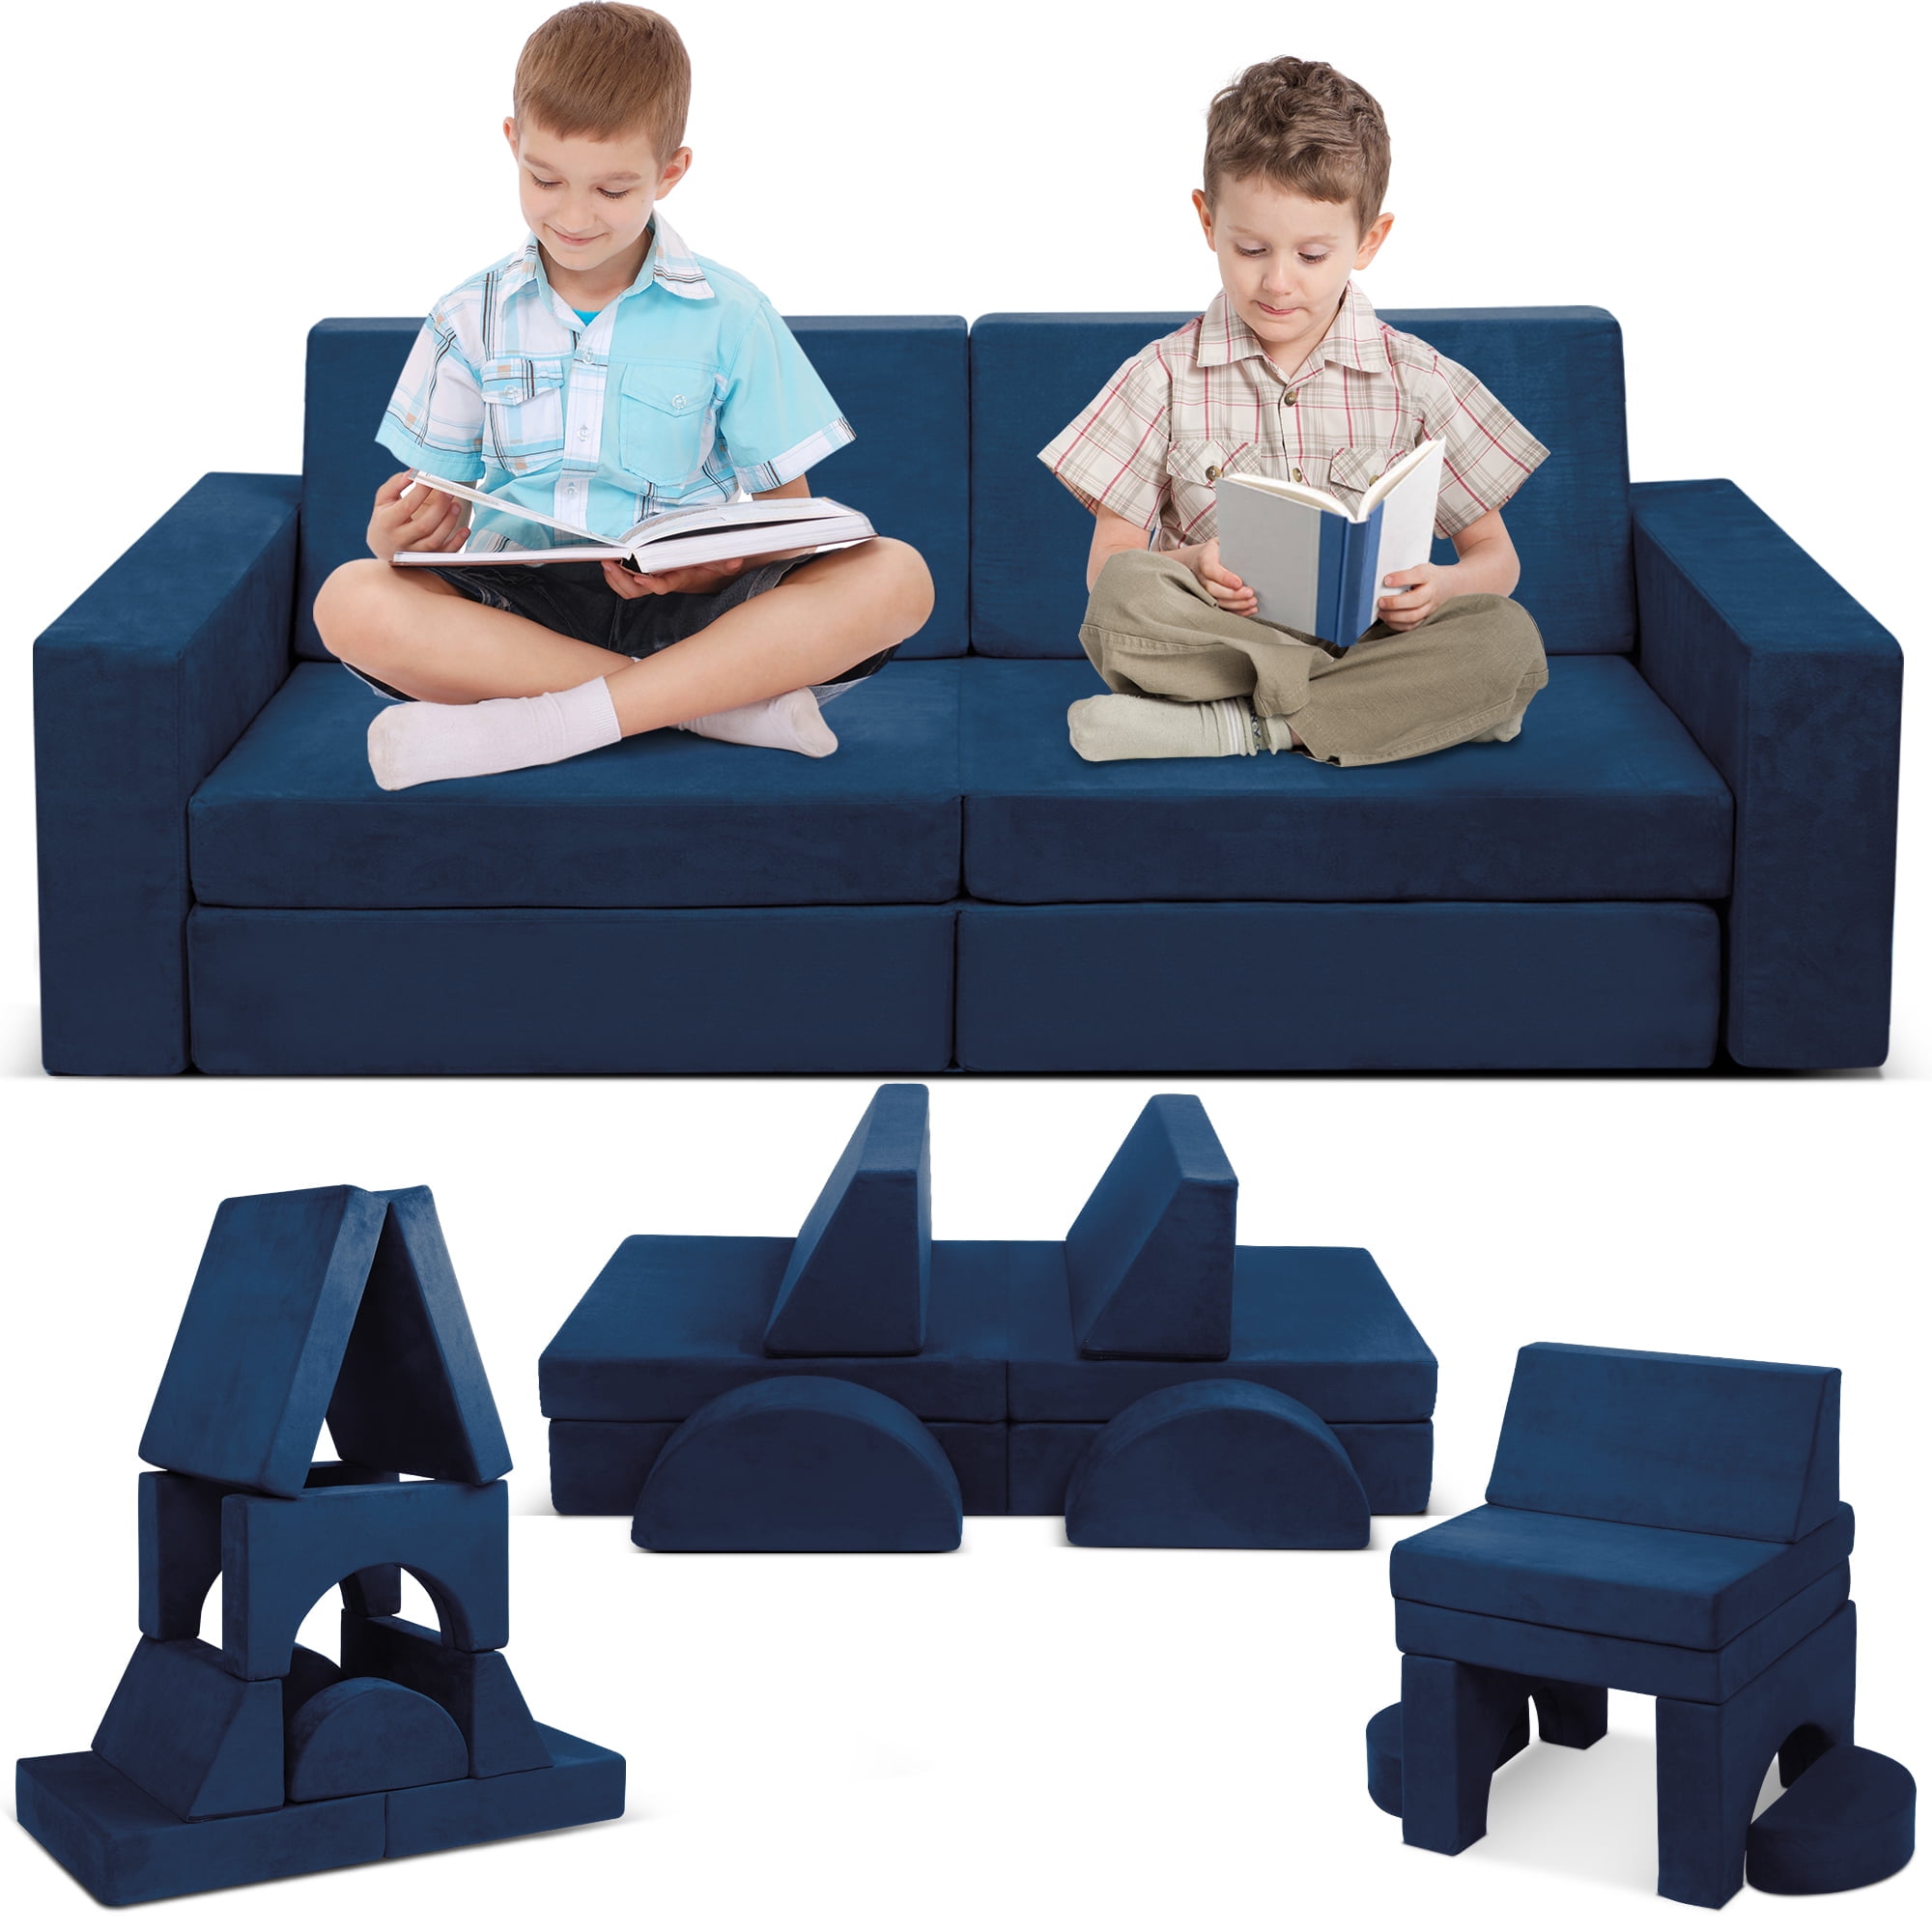 Play Imaginative Boys Teen Modular Girls Furniture Tolead to Kids,Toddler Convertible Child Gray Couch and Playroom for Bedroom Set Sofa, Creative Sectional Play Furniture, Sofa, Kids